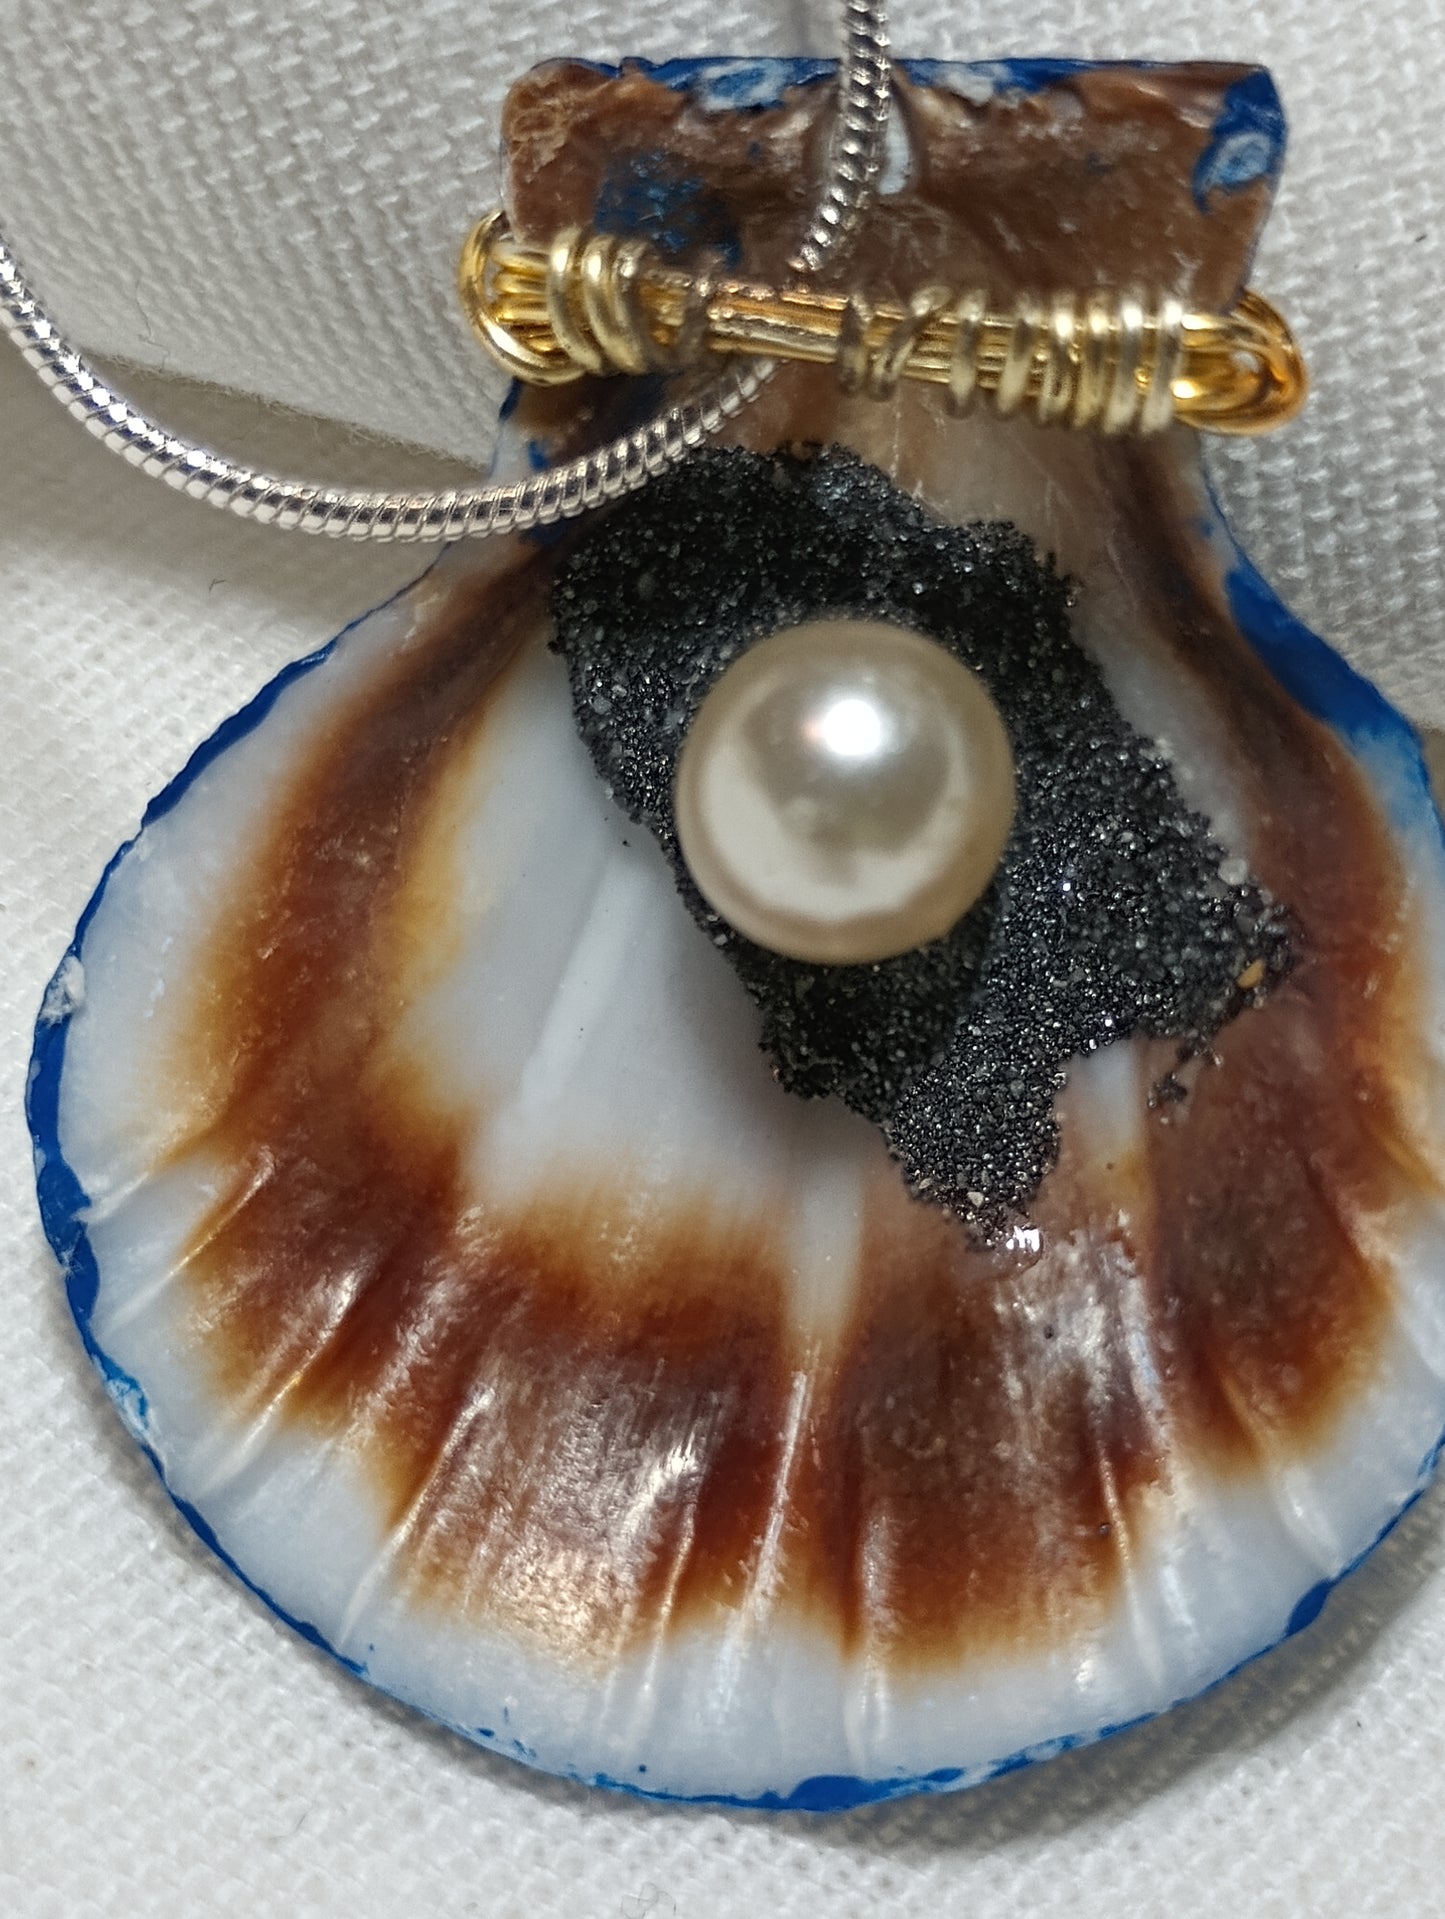 Painted Shell Pendant - Shell with Rose Charm - Sand and Pearl Inside